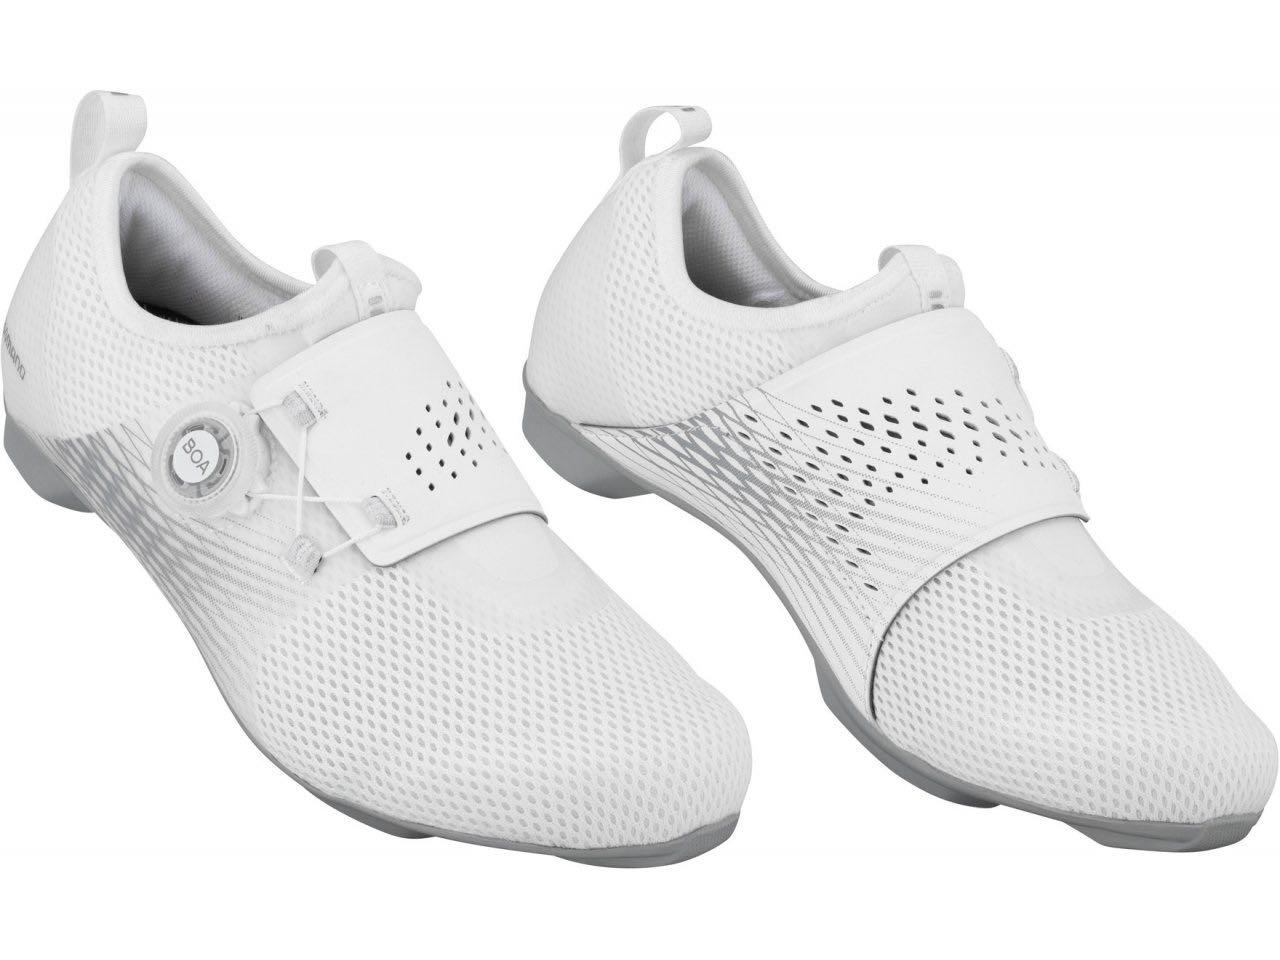 cheap indoor cycling shoes